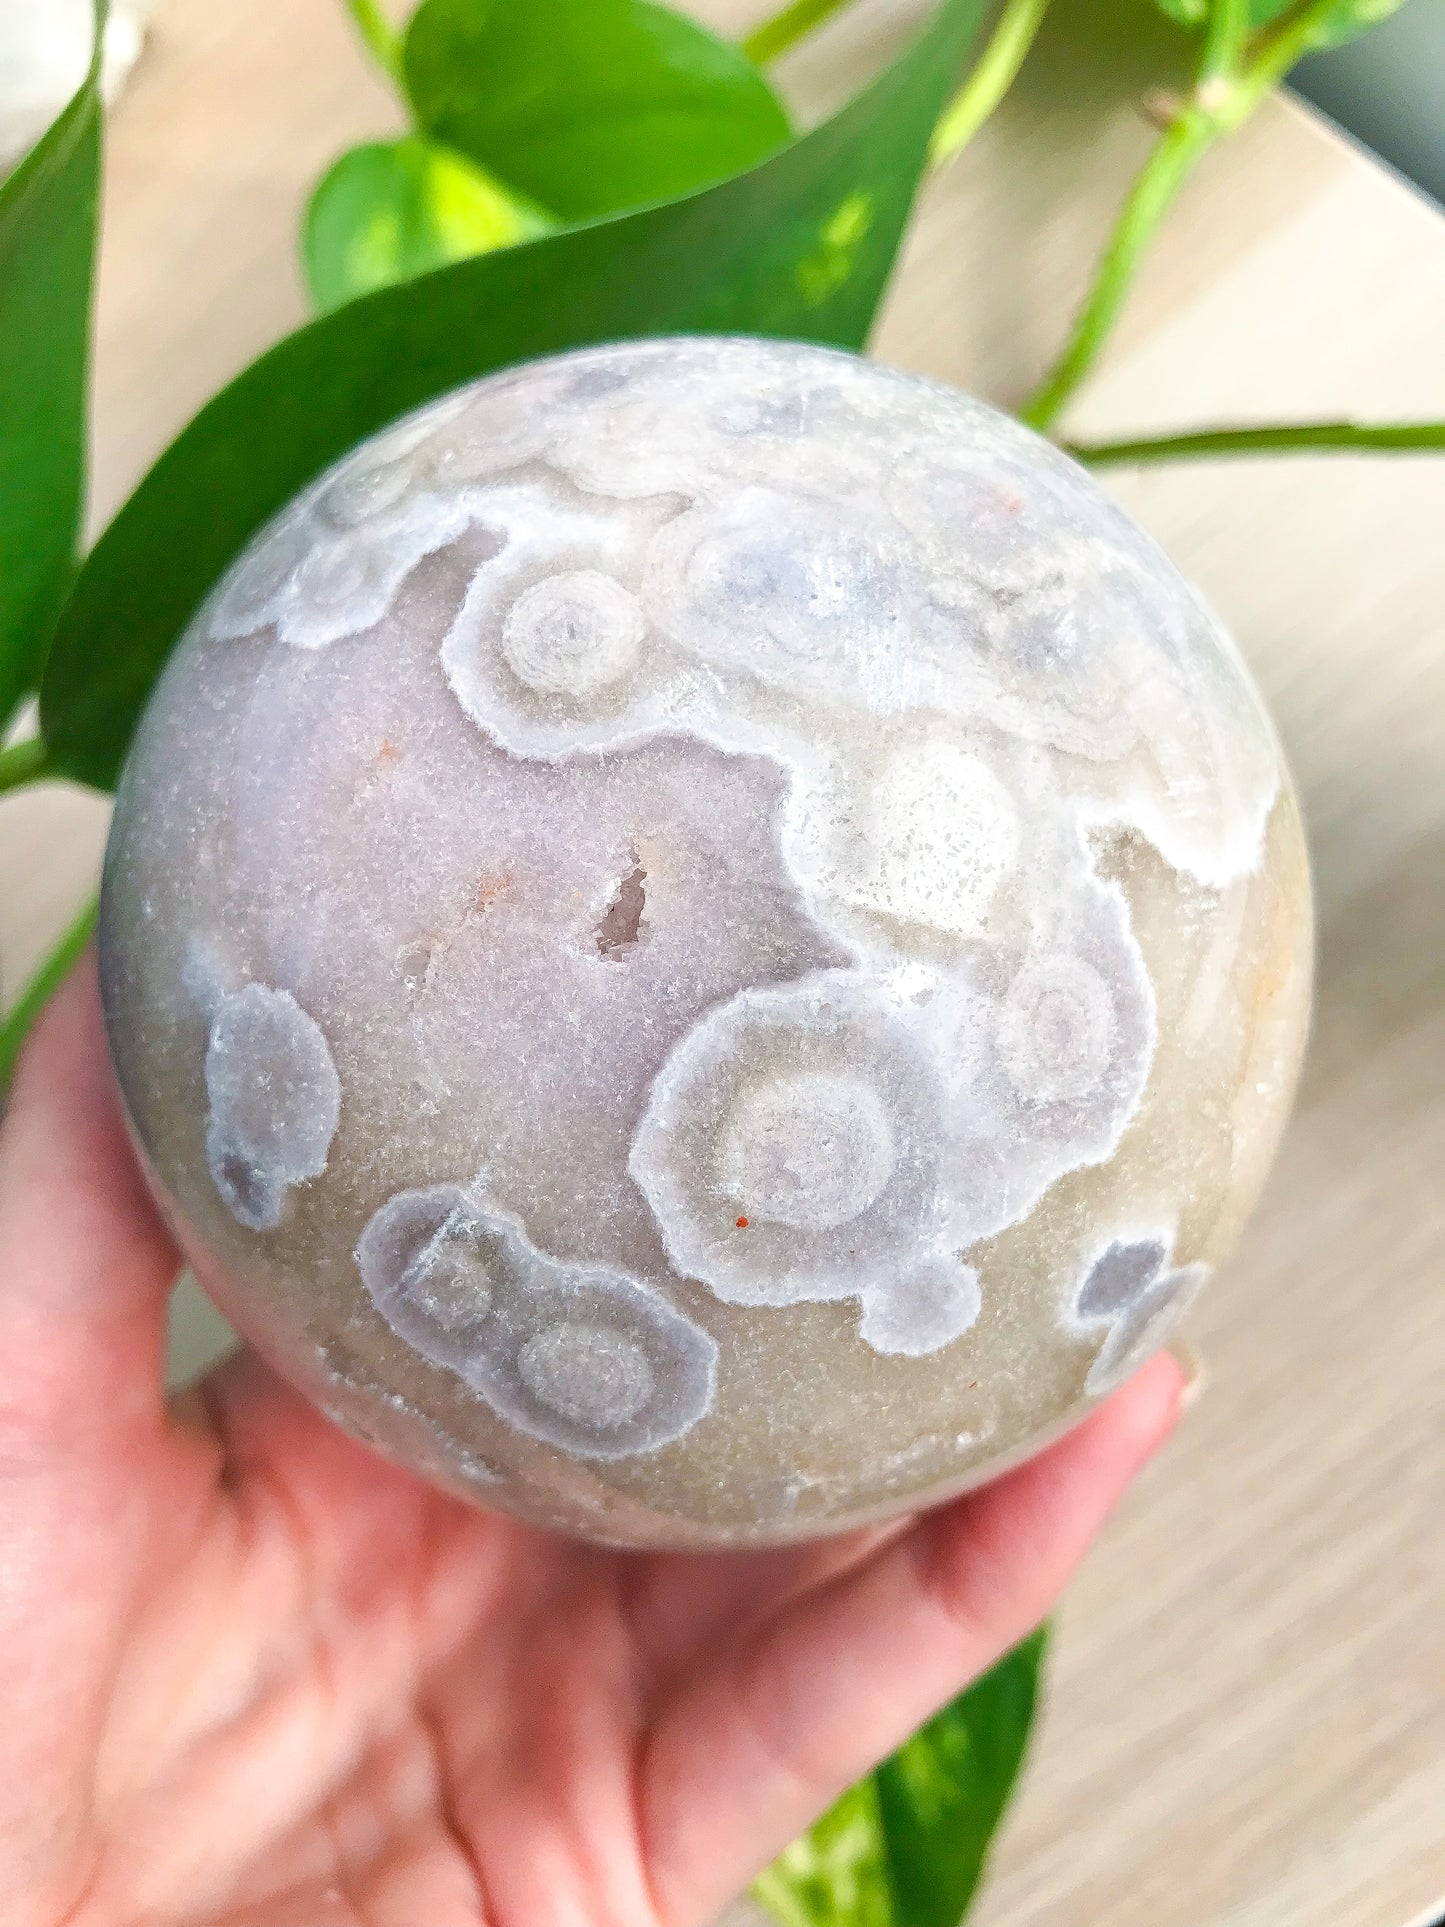 Sparkly Orbicular Flower Pink Amethyst Sphere w/Agate Inclusions